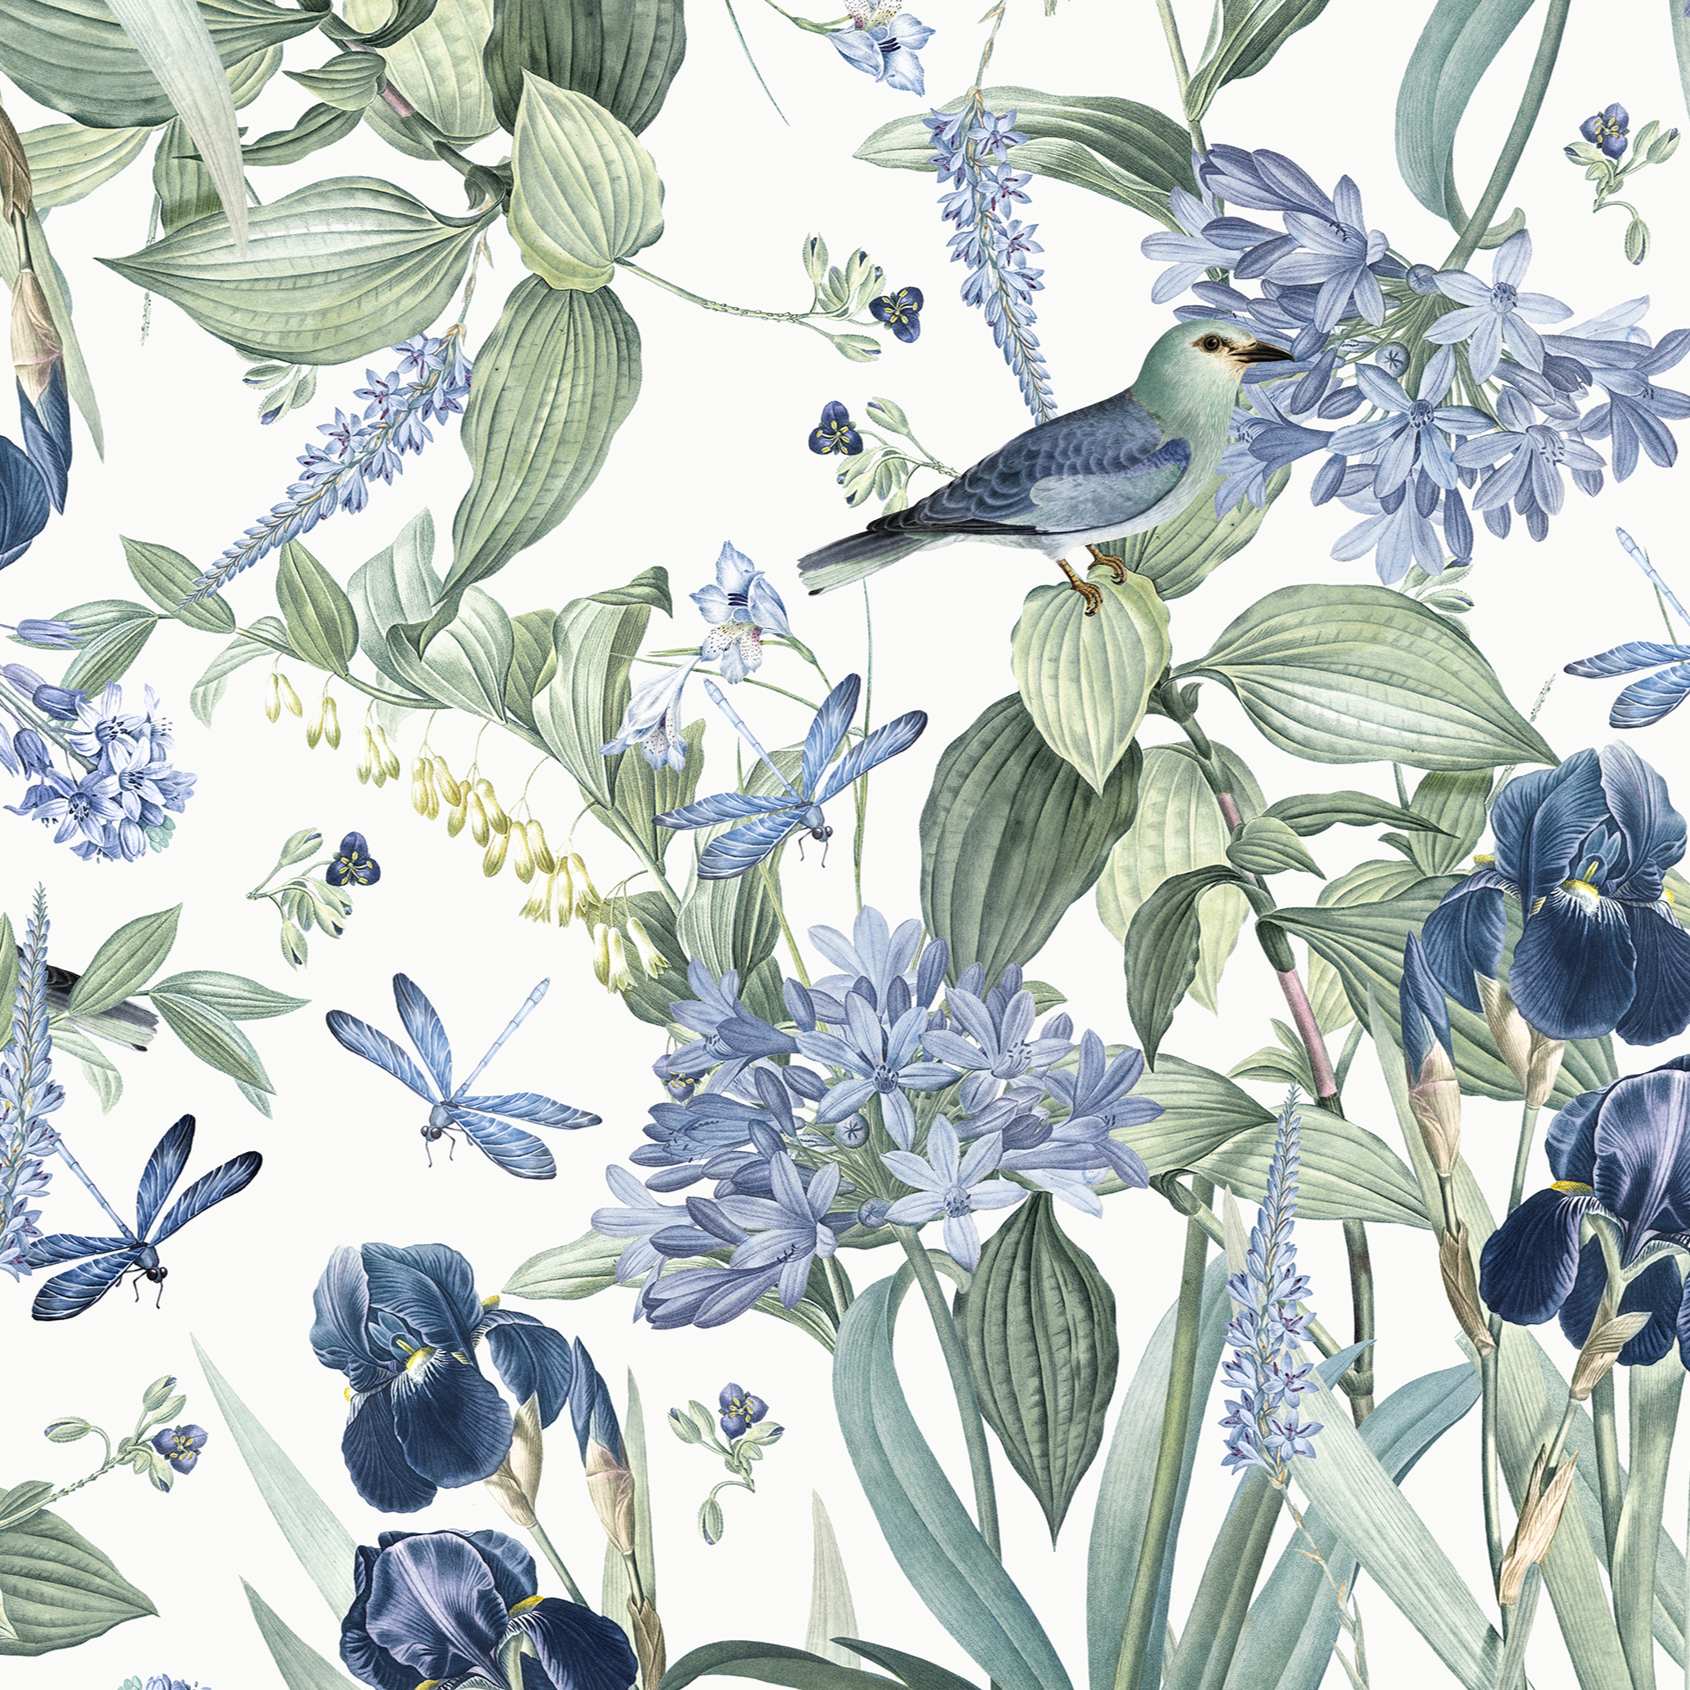 A close-up view of the 'Mint Floral Wallpaper - 50"', displaying its vibrant pattern of blue flowers, green leaves, and small birds, offering a detailed and refreshing visual texture to any room.